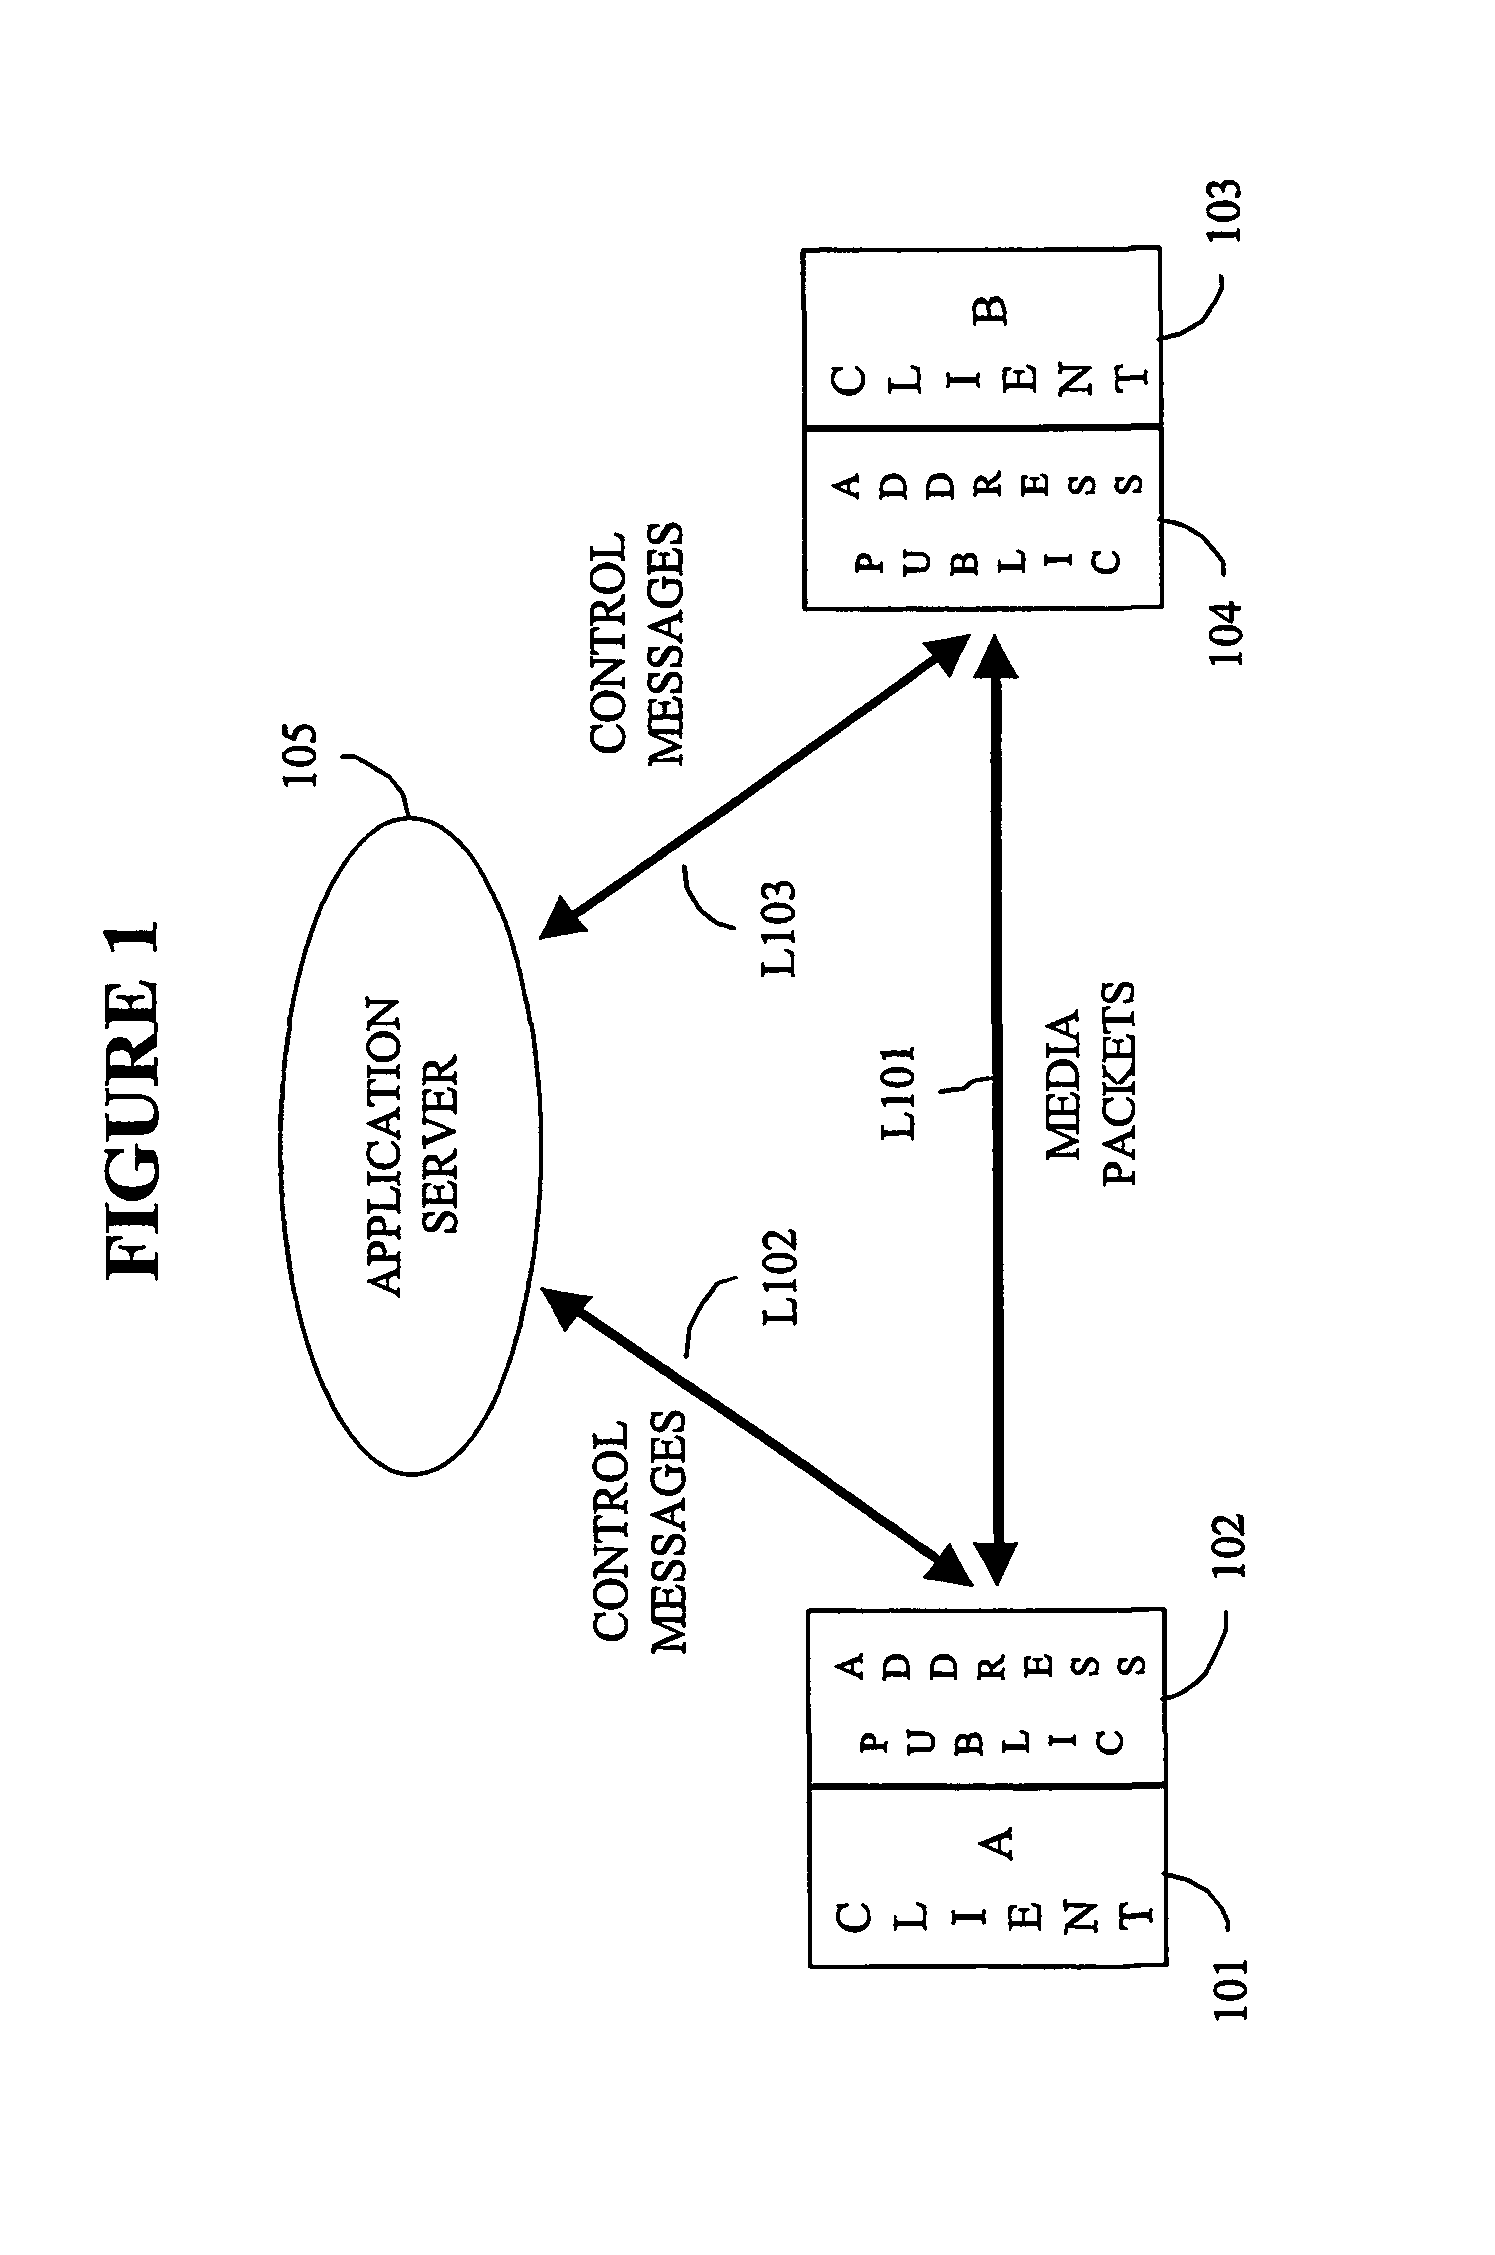 System, method, and computer program product for resolving addressing in a network including a network address translator